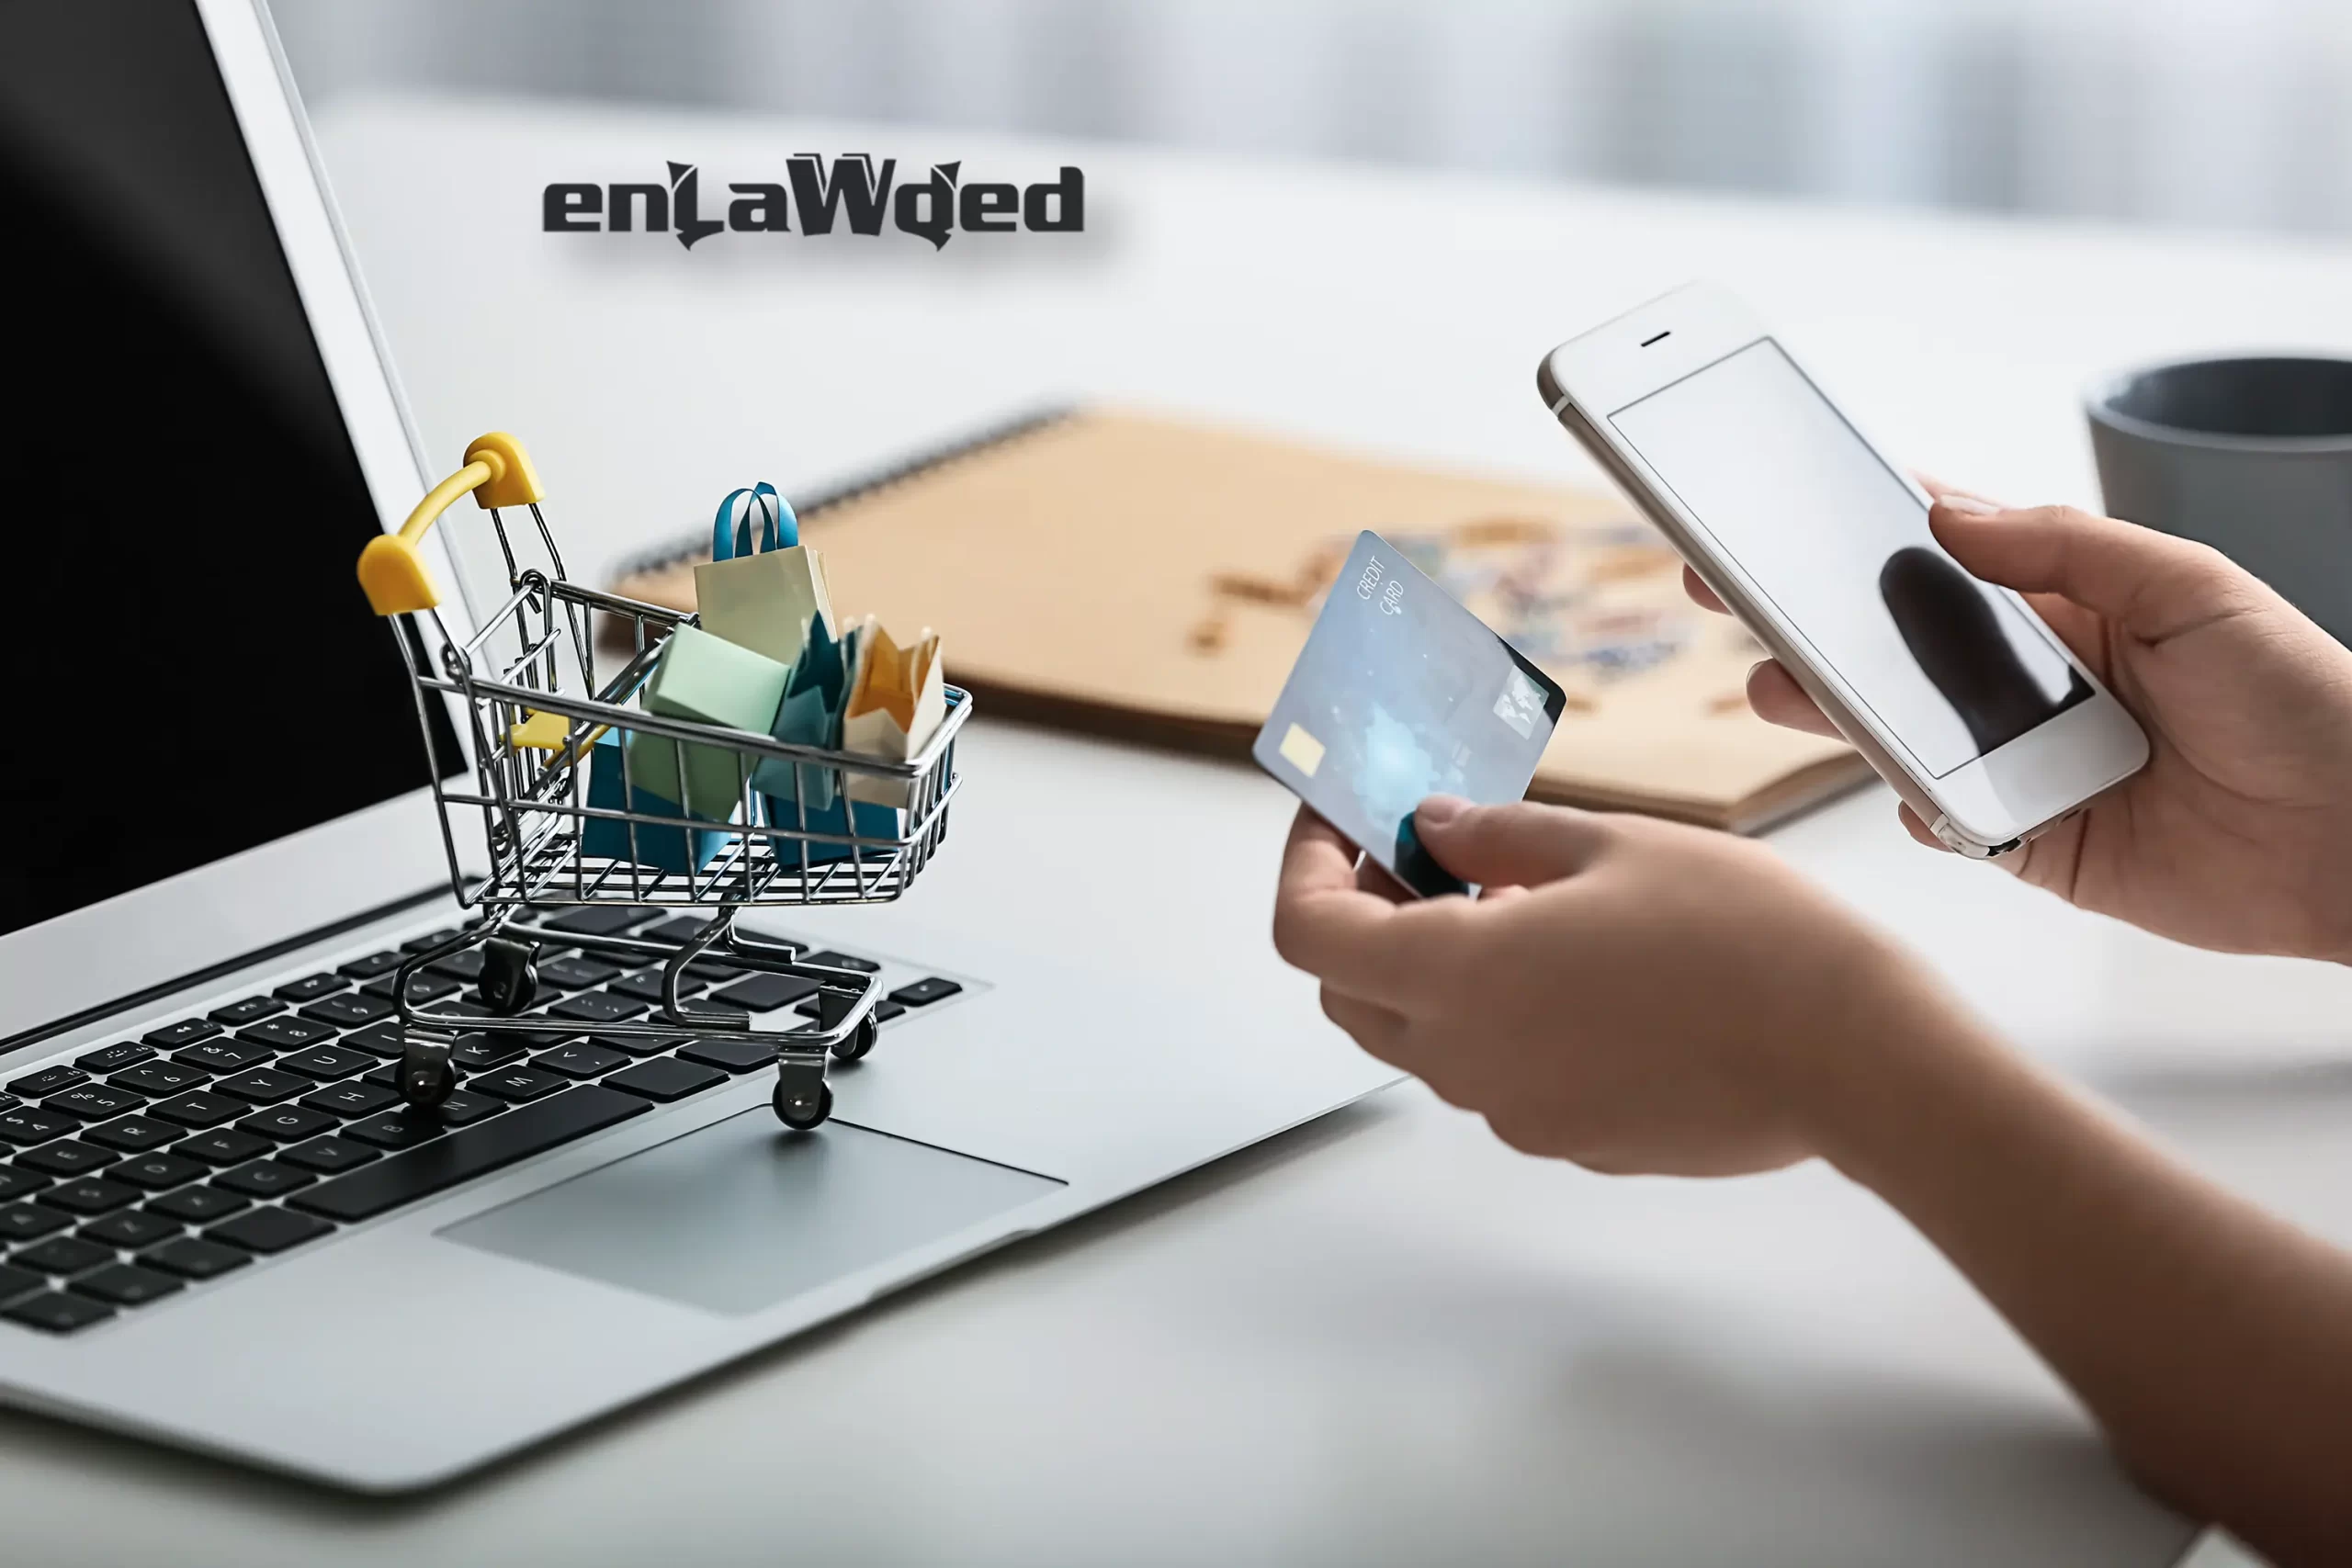 EnLawded's Shopping cart page